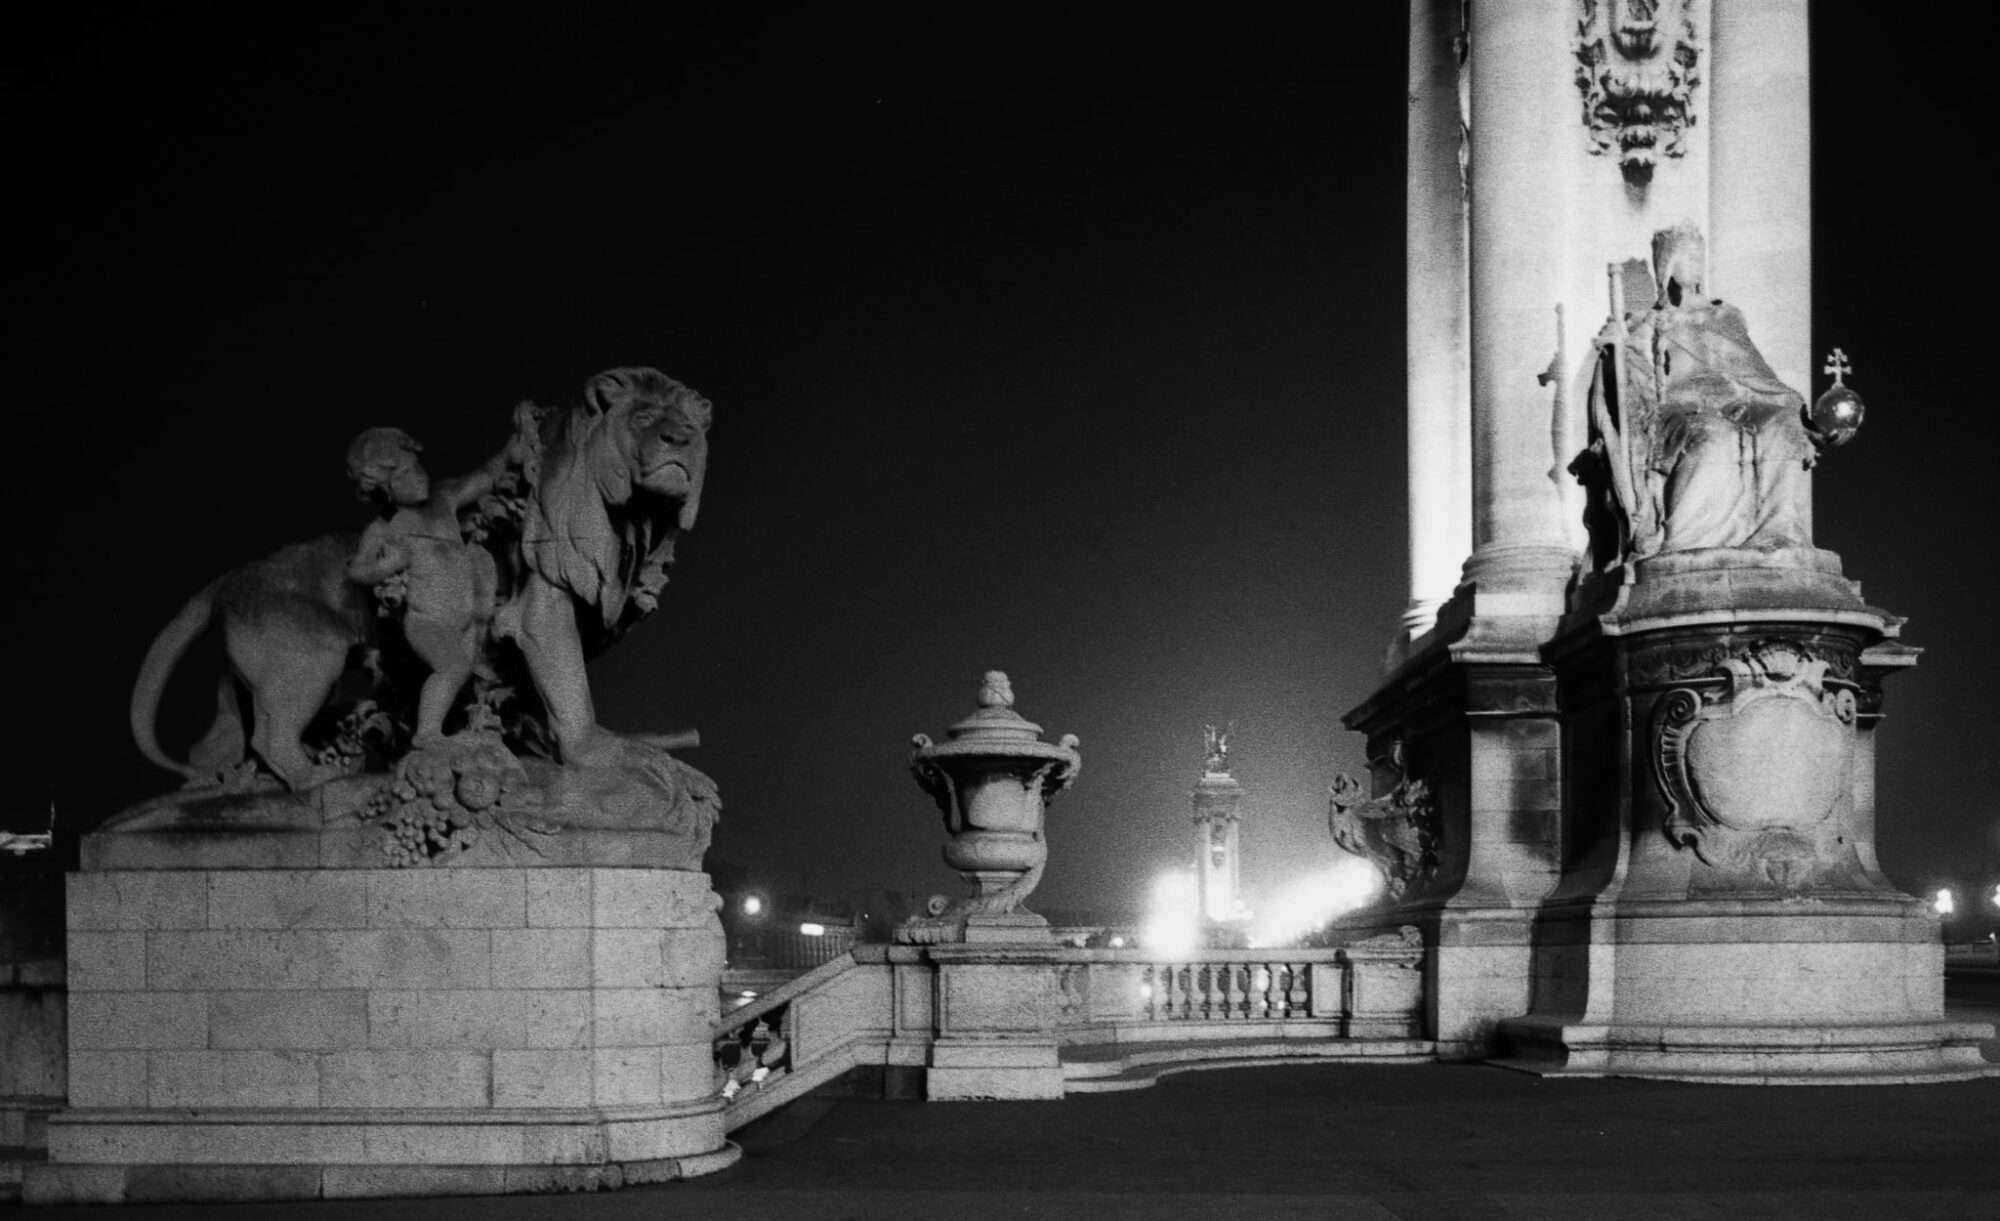 An eerie view of Pont Alexandre at night in black and white.